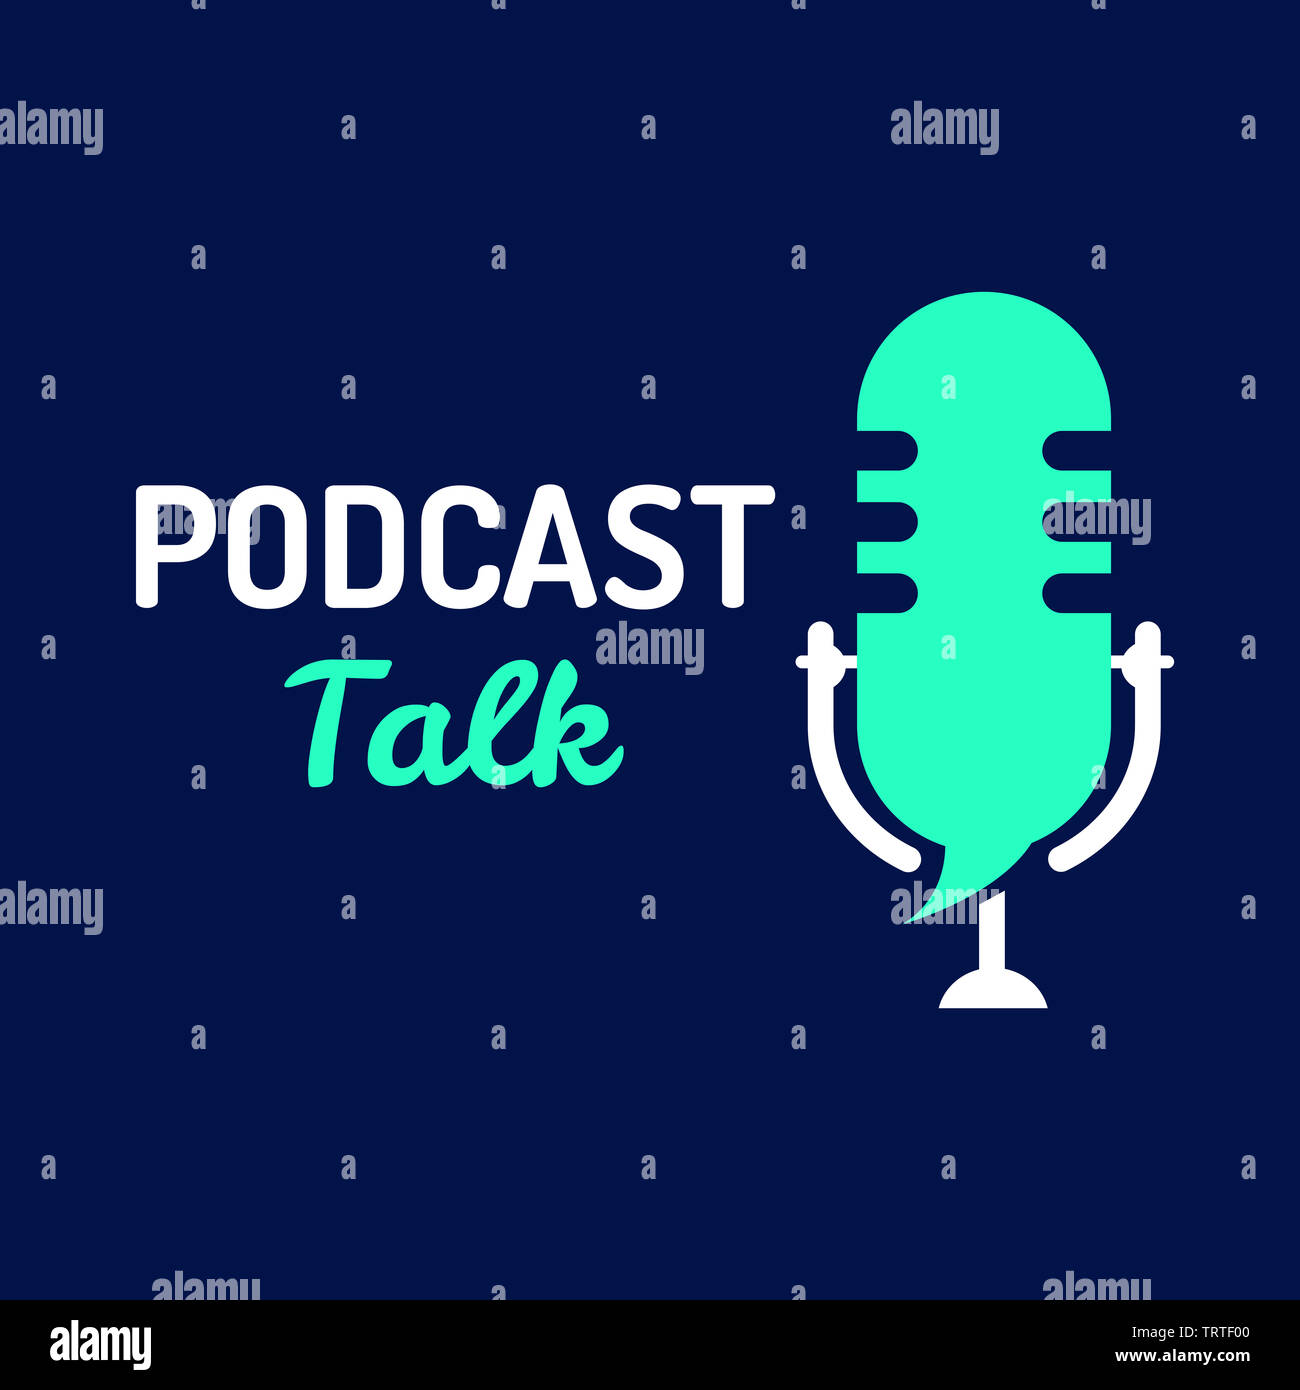 logo or icon podcast talk with light color,vector graphic Stock Photo